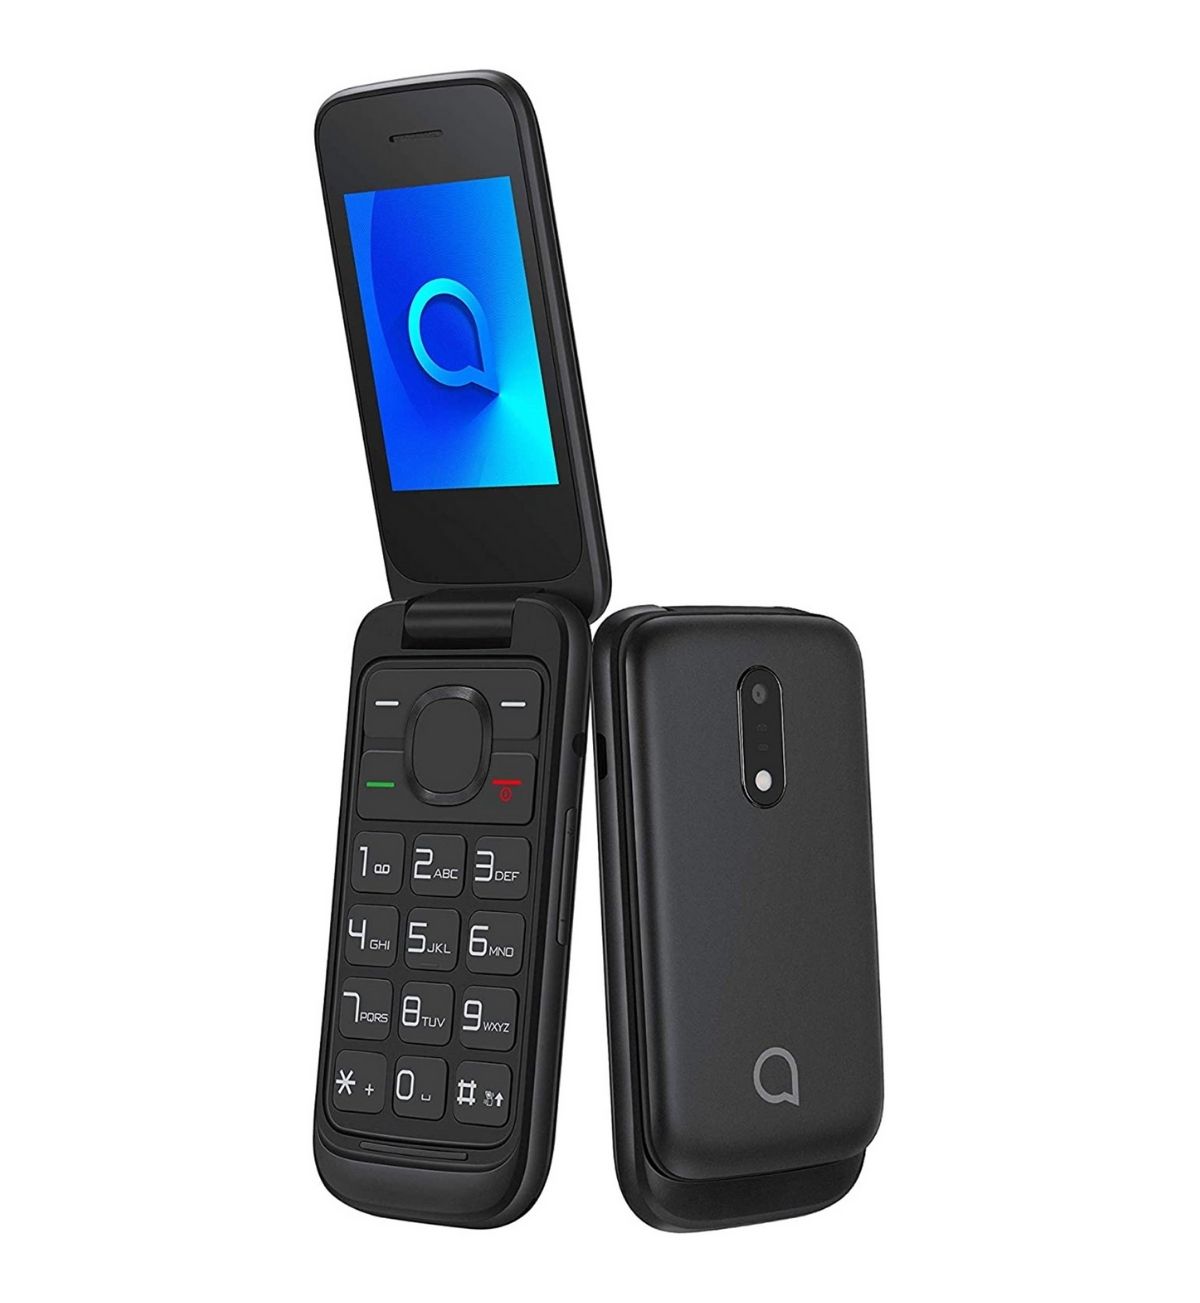 Image of the Alcatel 2053 phone in its closed clamshell position, showcasing its sleek design.